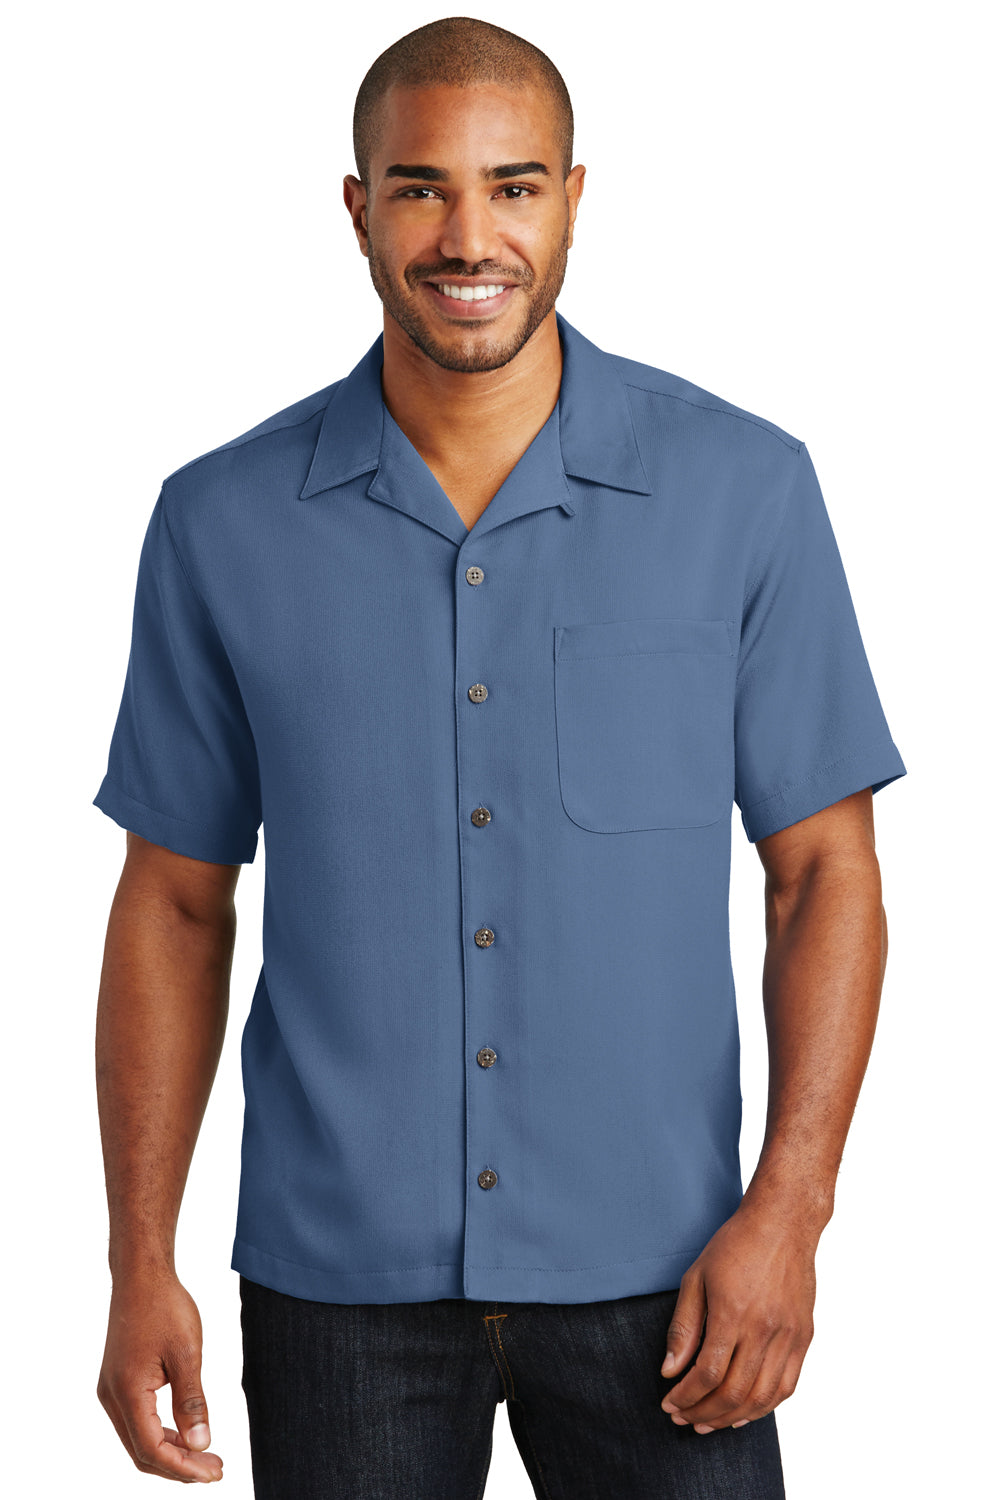 Port Authority S535 Mens Blue Easy Care Stain Resistant Short Sleeve ...